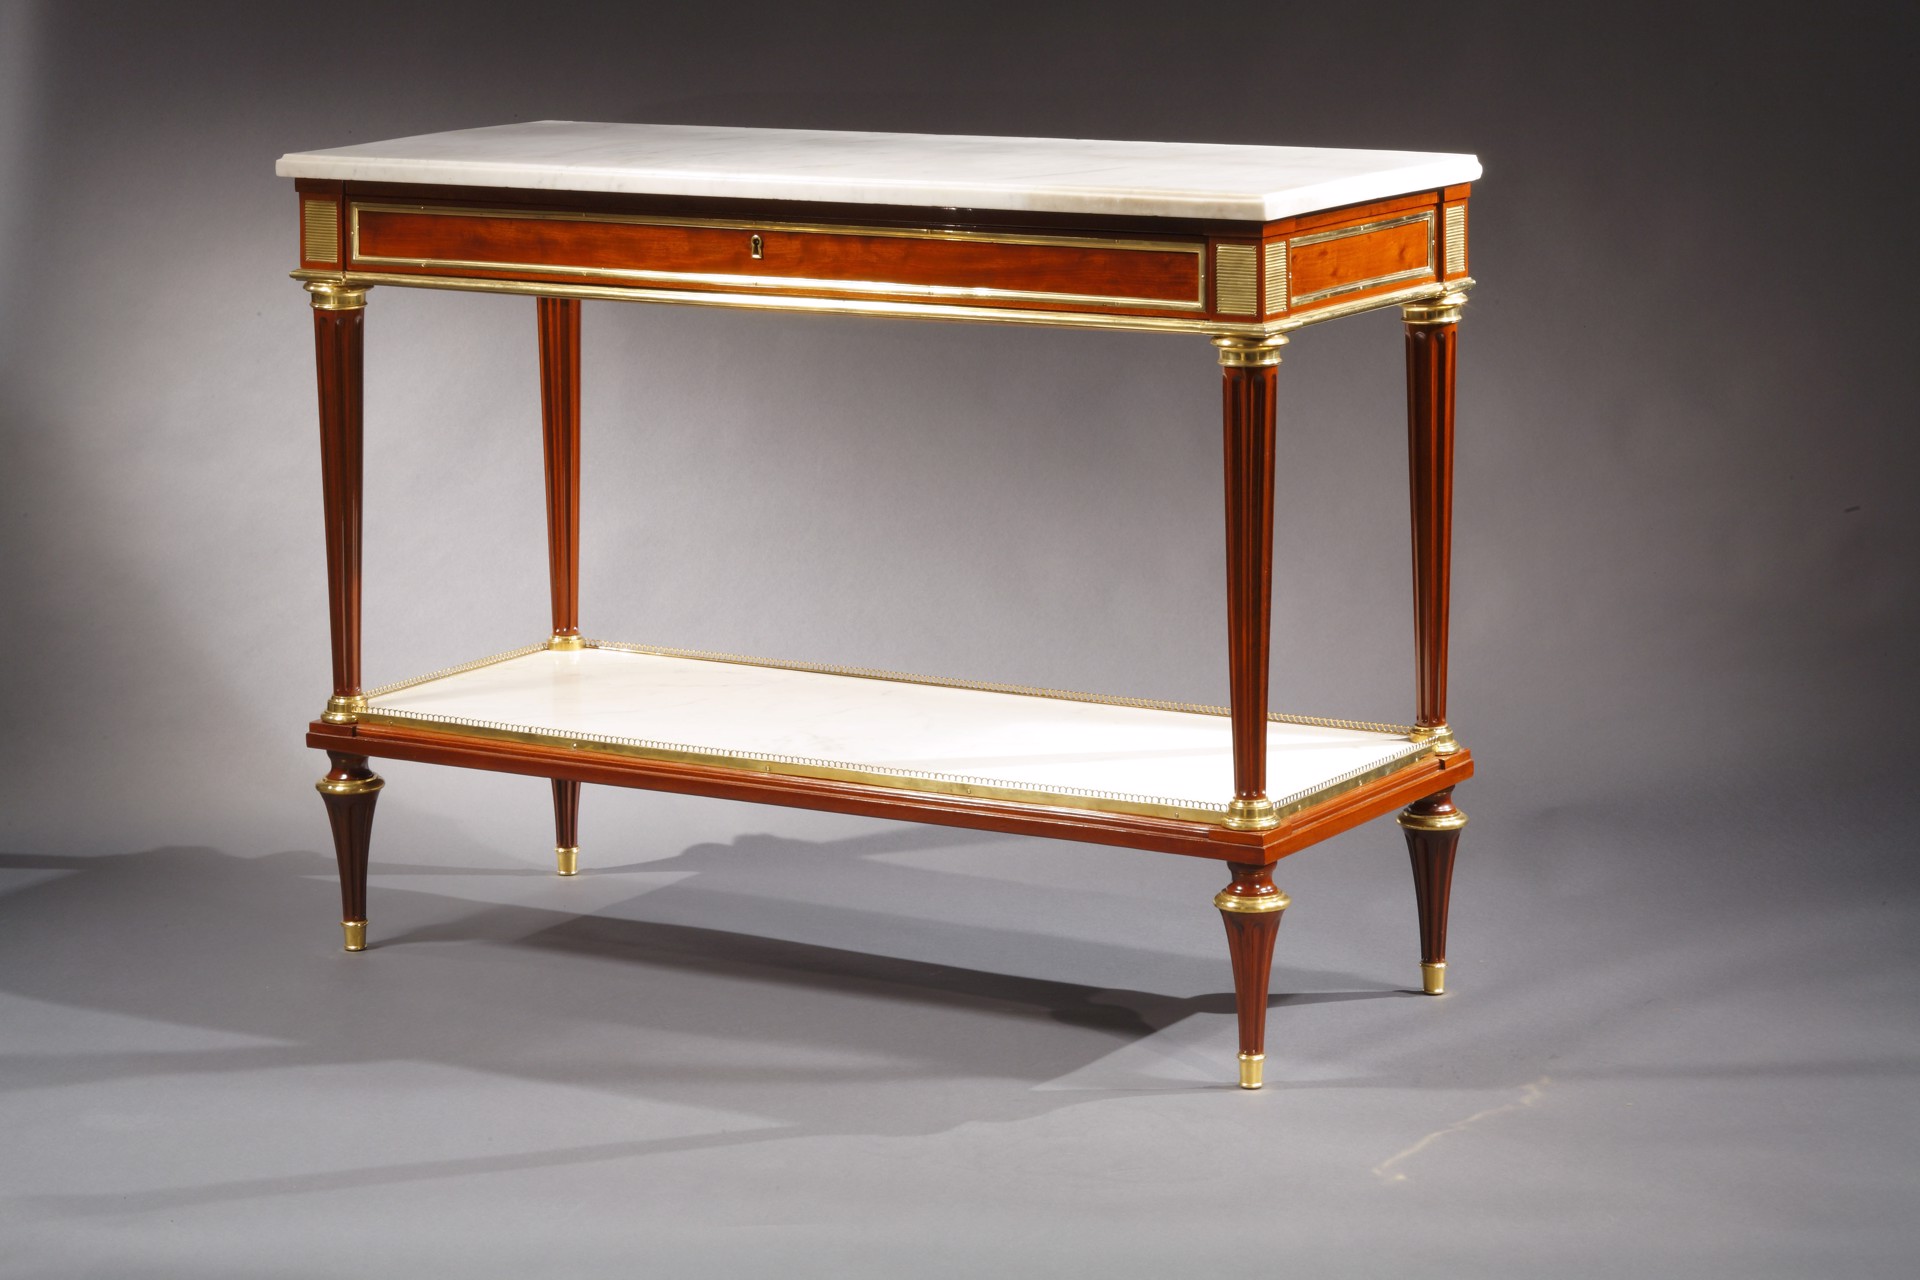 PAIR OF LOUIS XVI MAHOGANY MARBLE TOP CONSOLES ATTRIB. TO WEISWEILER by Adam Weisweiler